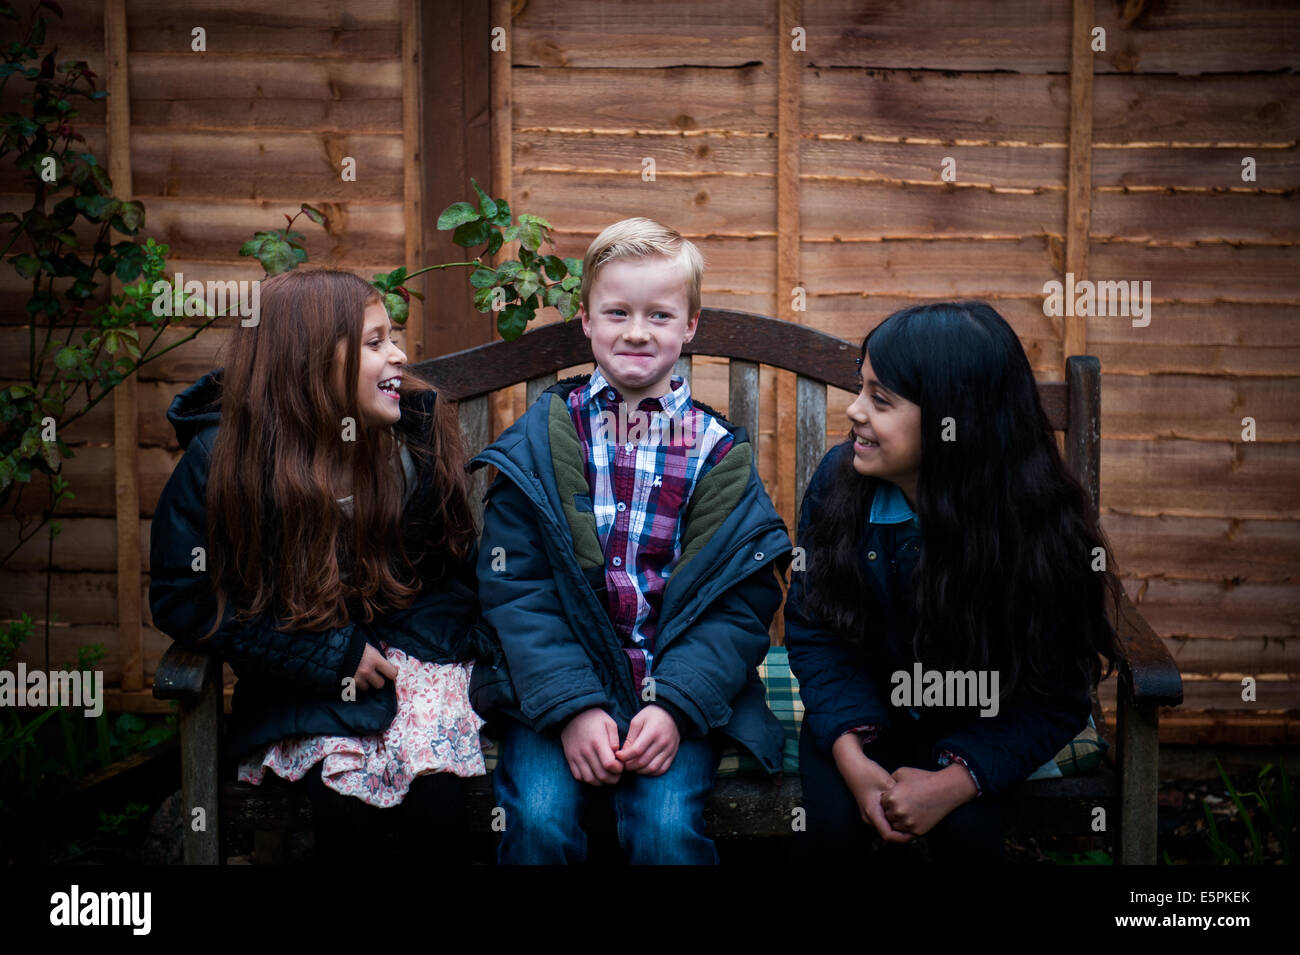 embarrassed boy in the middle while girls talk Stock Photo